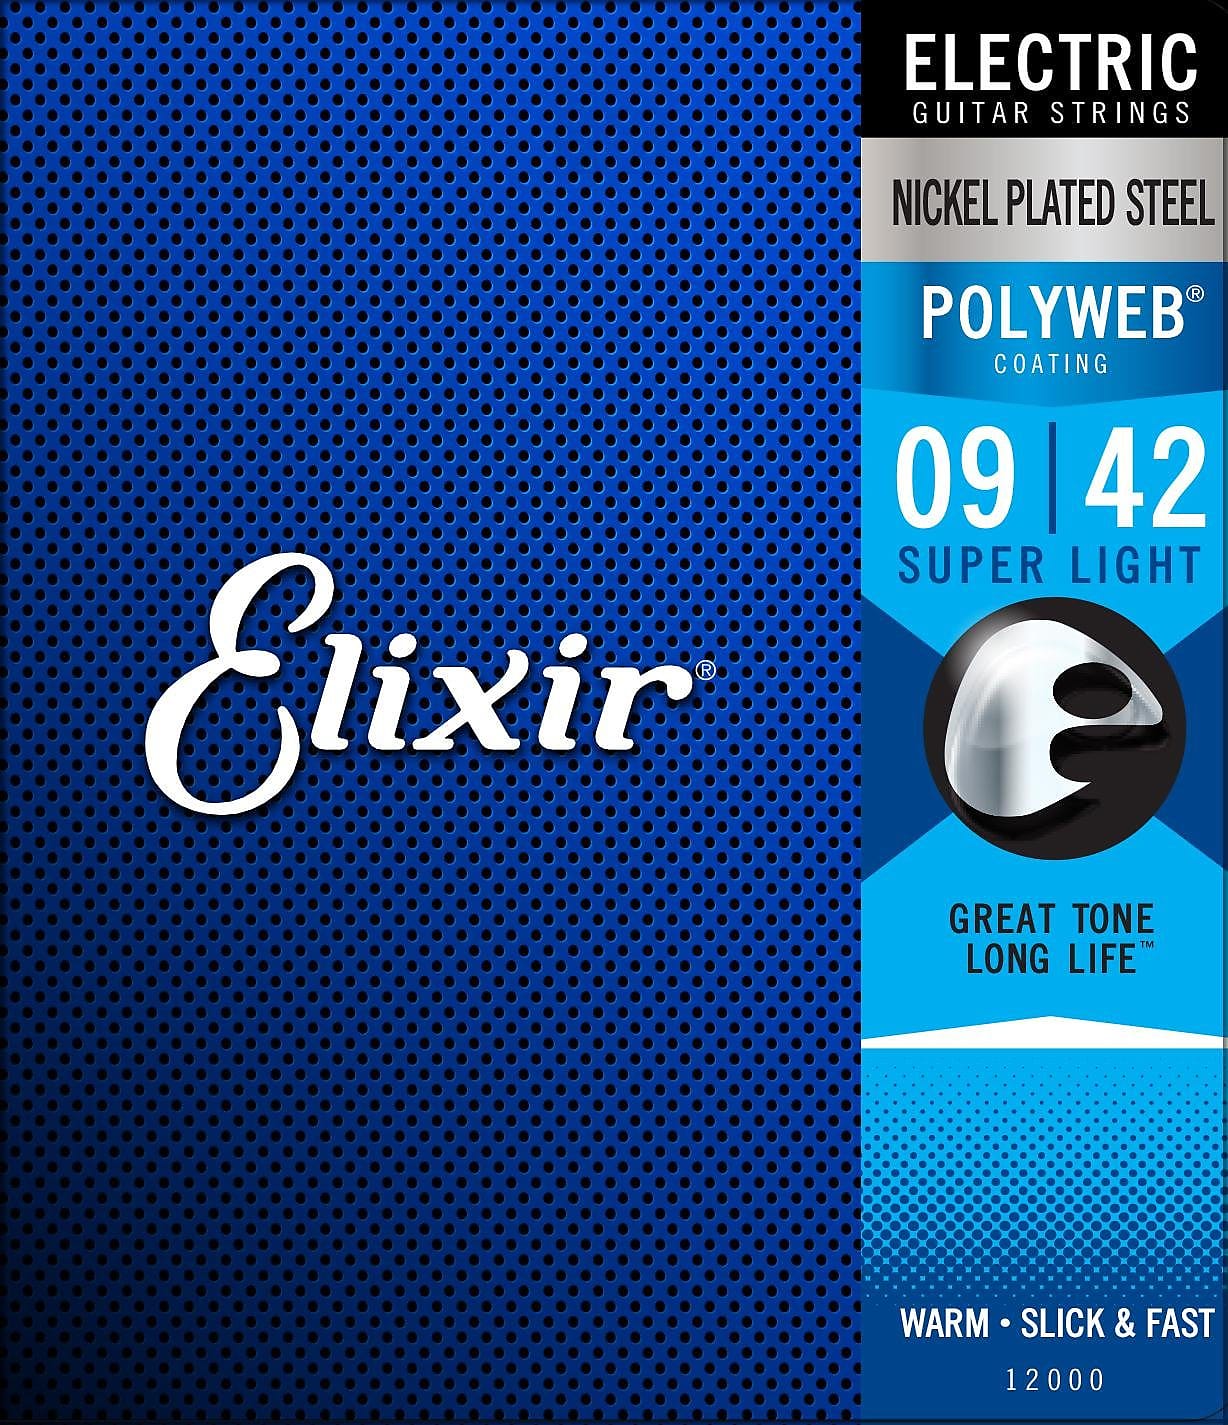 Elixir Electric Nickel Plated Steel with POLYWEB® Coating, Super Light .009-.042